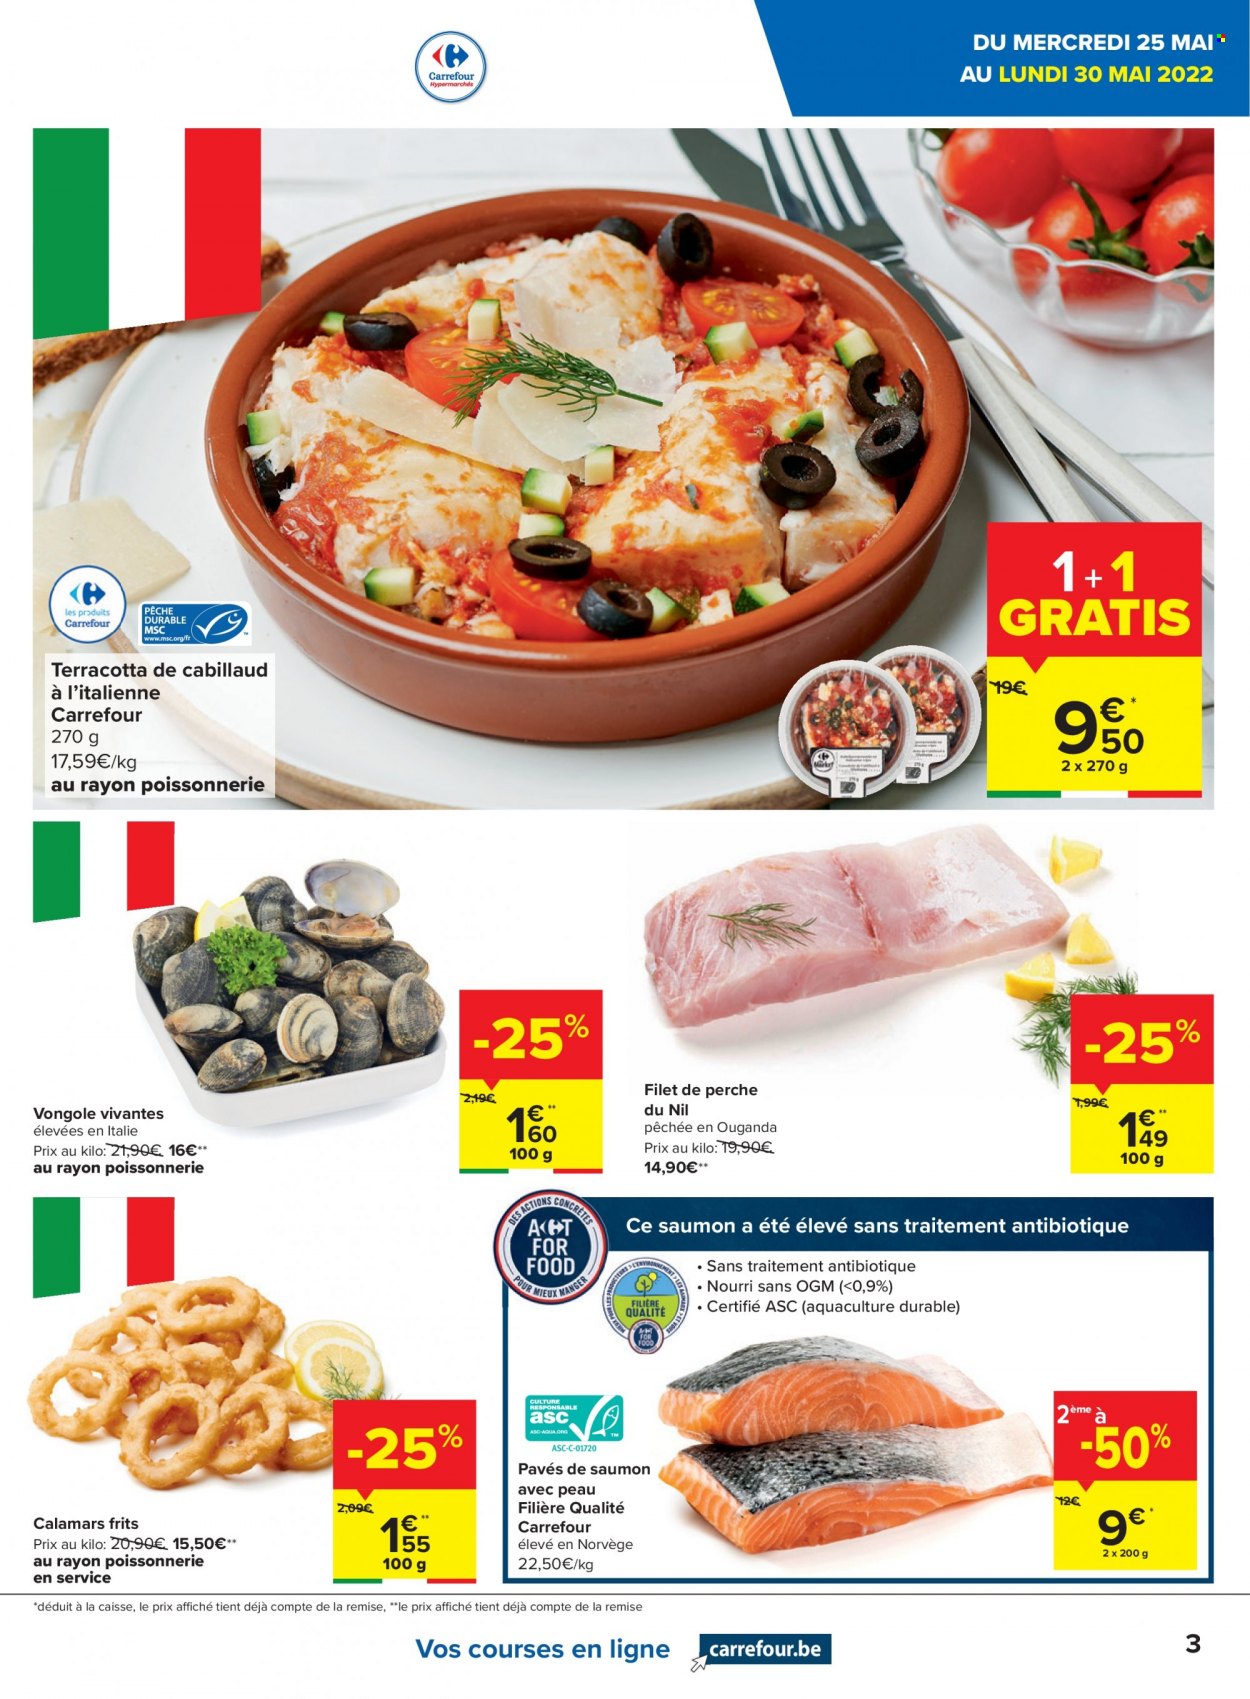 Catalogue Carrefour hypermarkt - 25.5.2022 - 31.5.2022. Page 3.